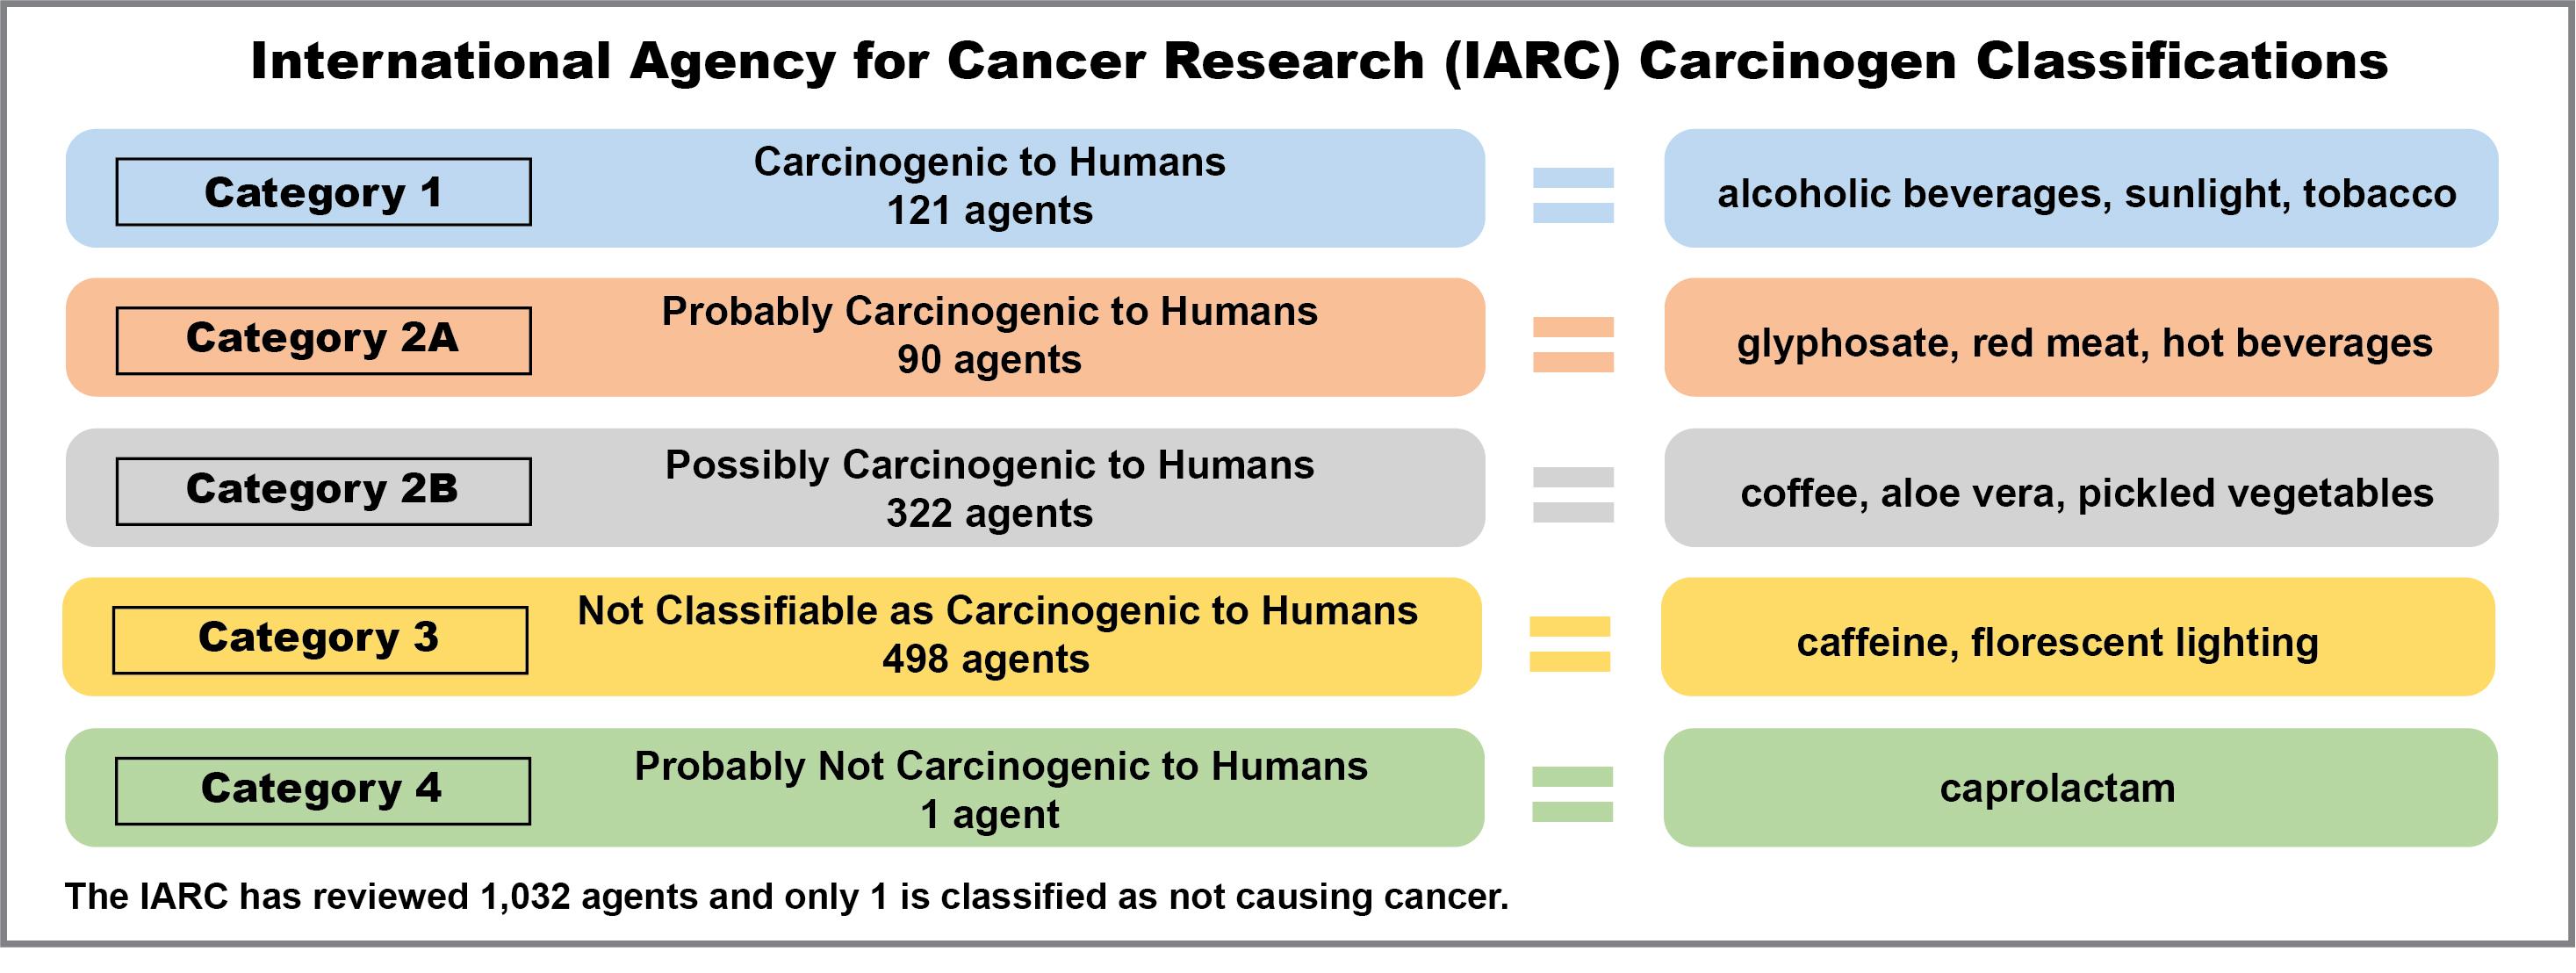 Figure 3. Categories and examples of substances classified as carcinogenic by the International Agency for Cancer Research (IARC)